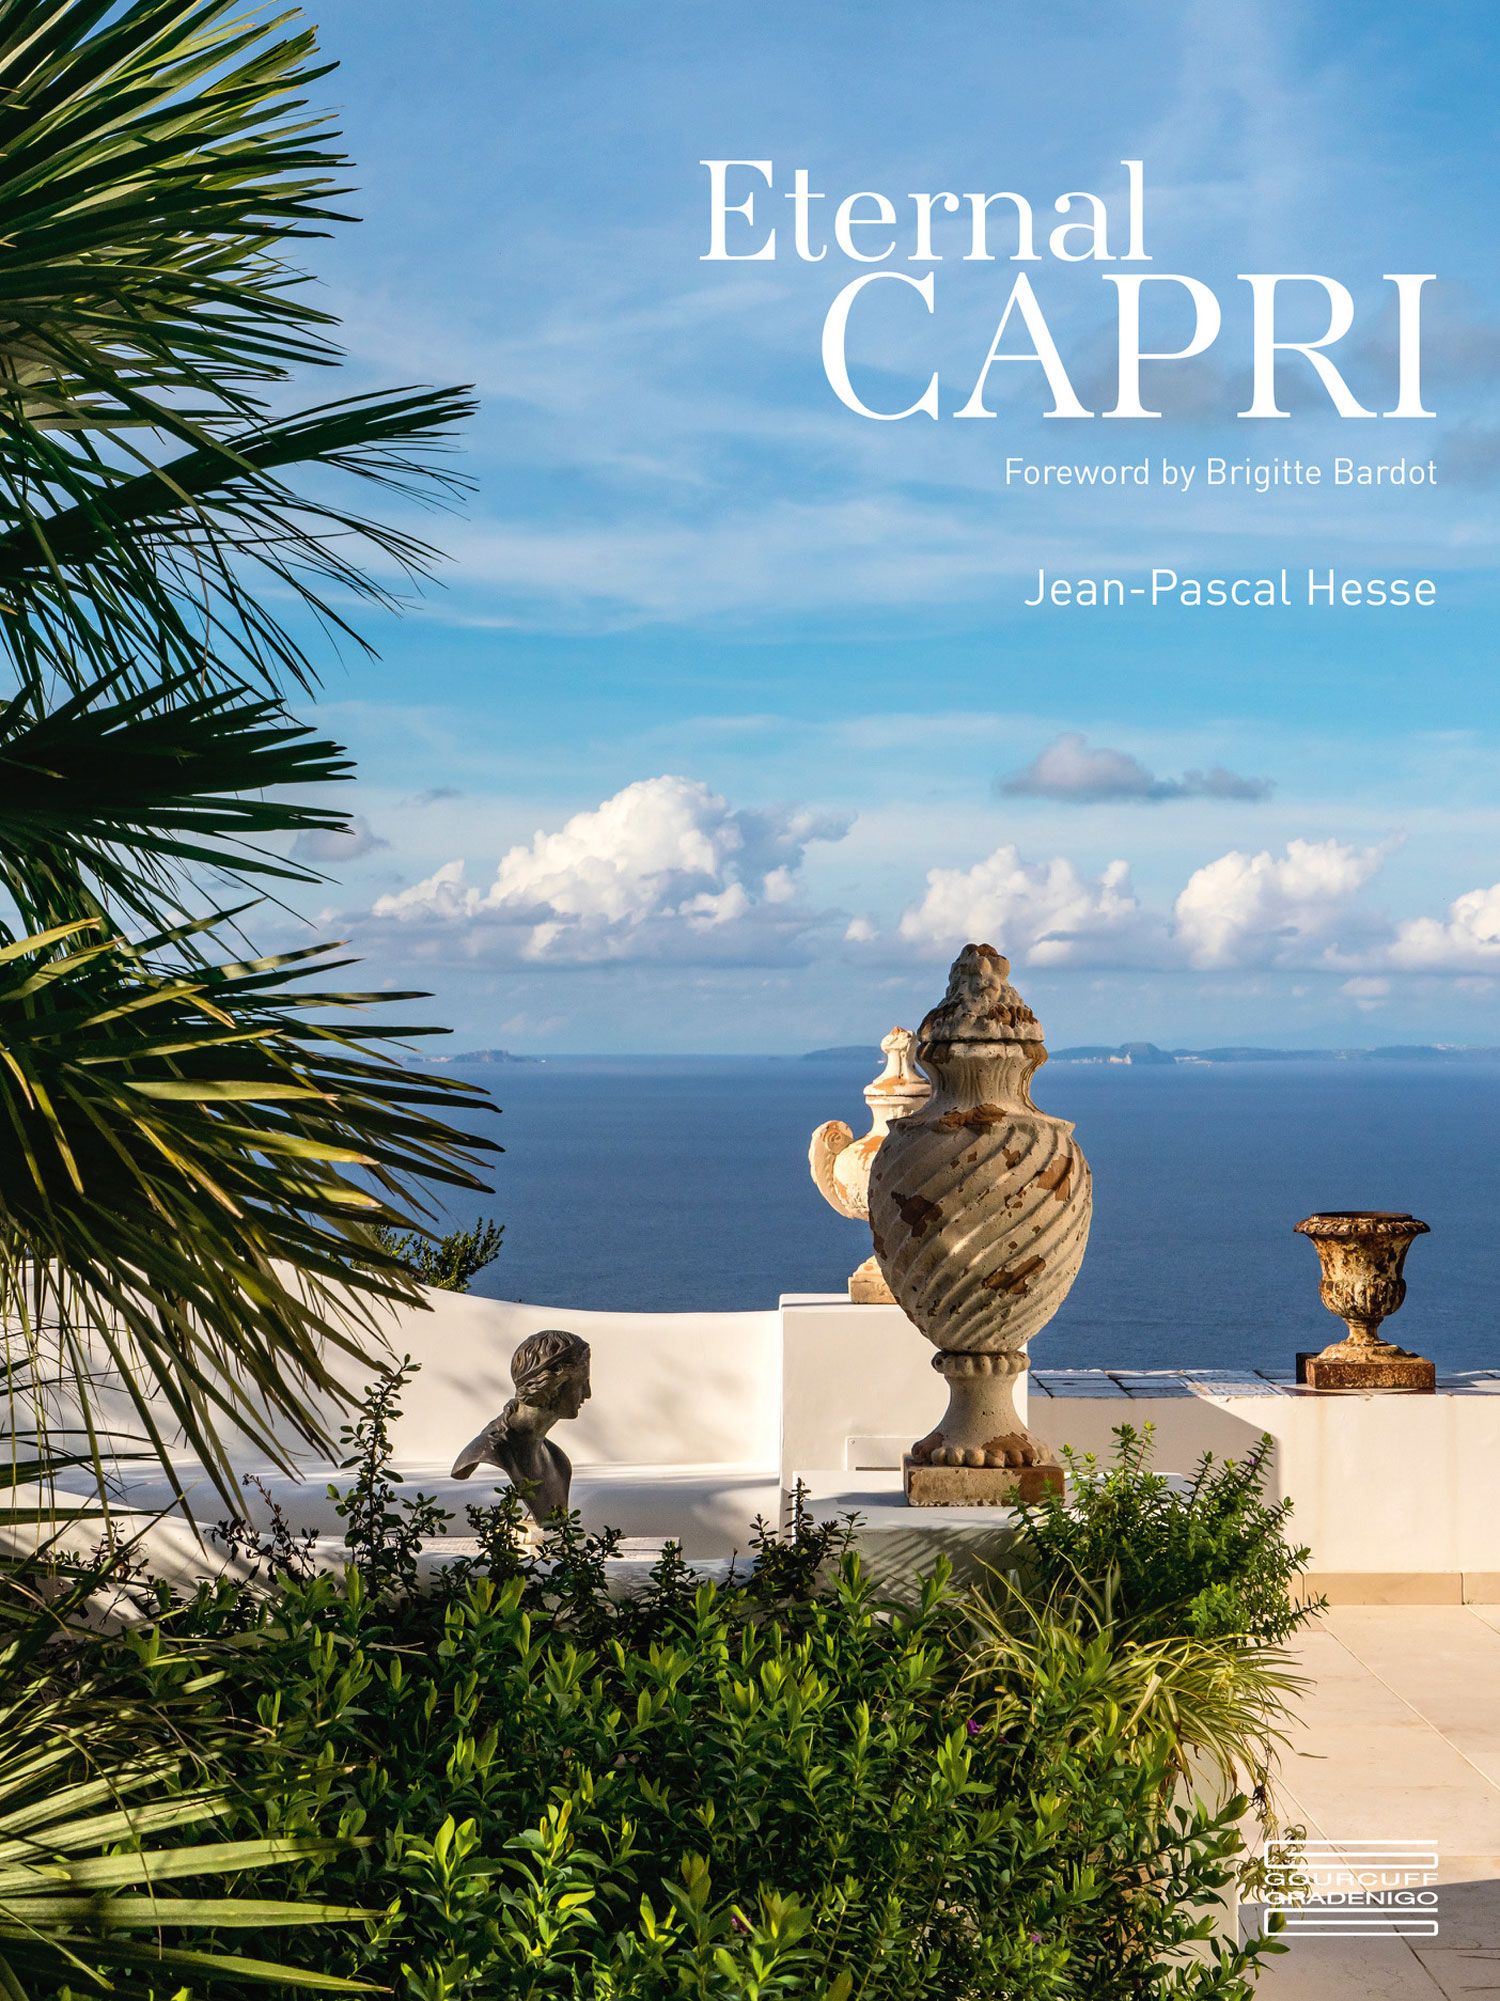 The cover of Eternal Capri by Jean-Pascal Hesse